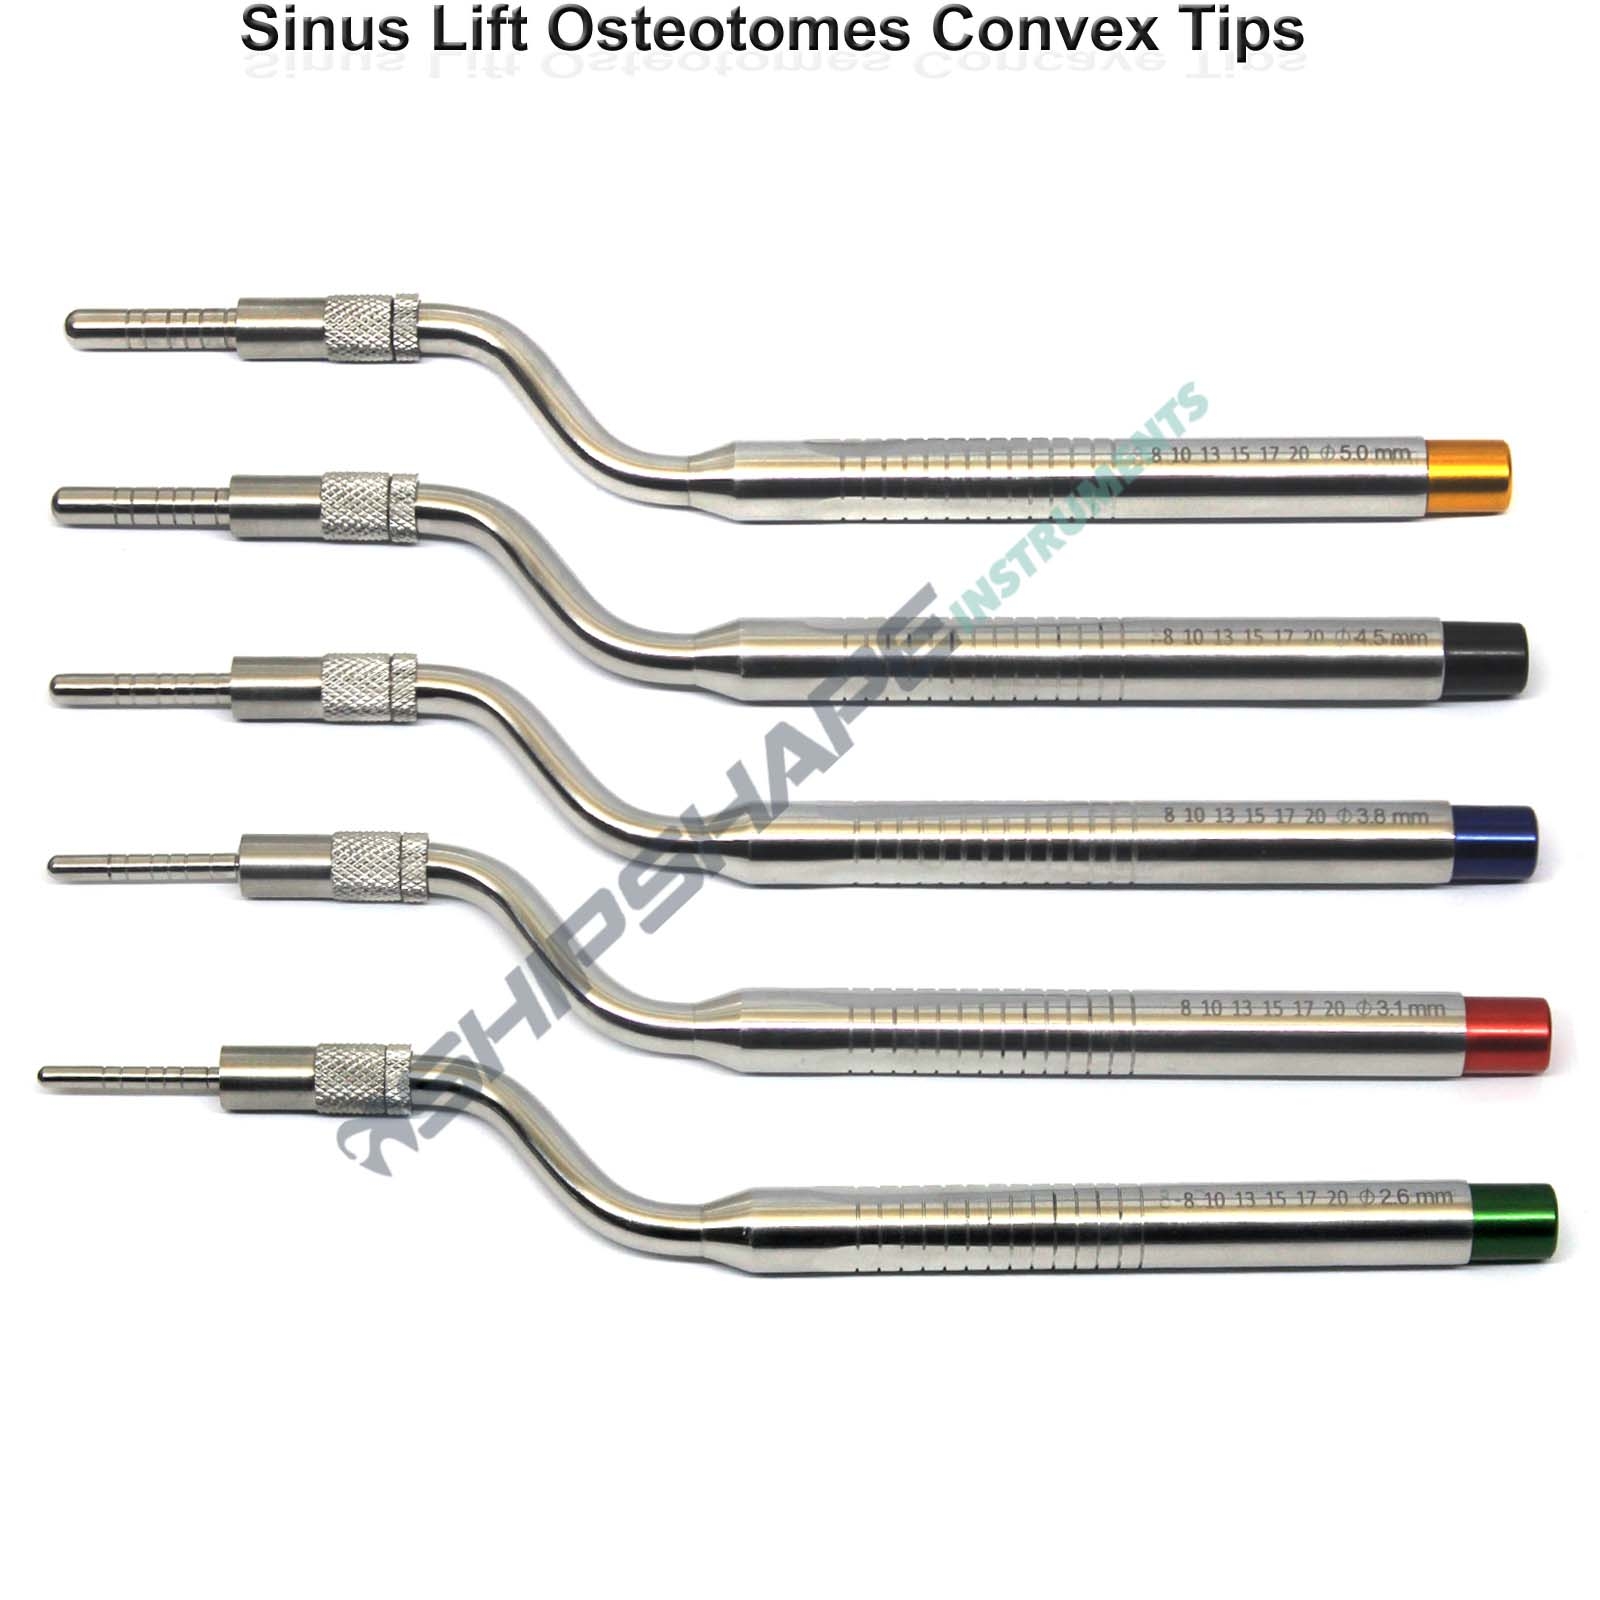 5 pcs Osteotomes Convex tip Angled Dental implant Instruments with Surgical Cassette-1345